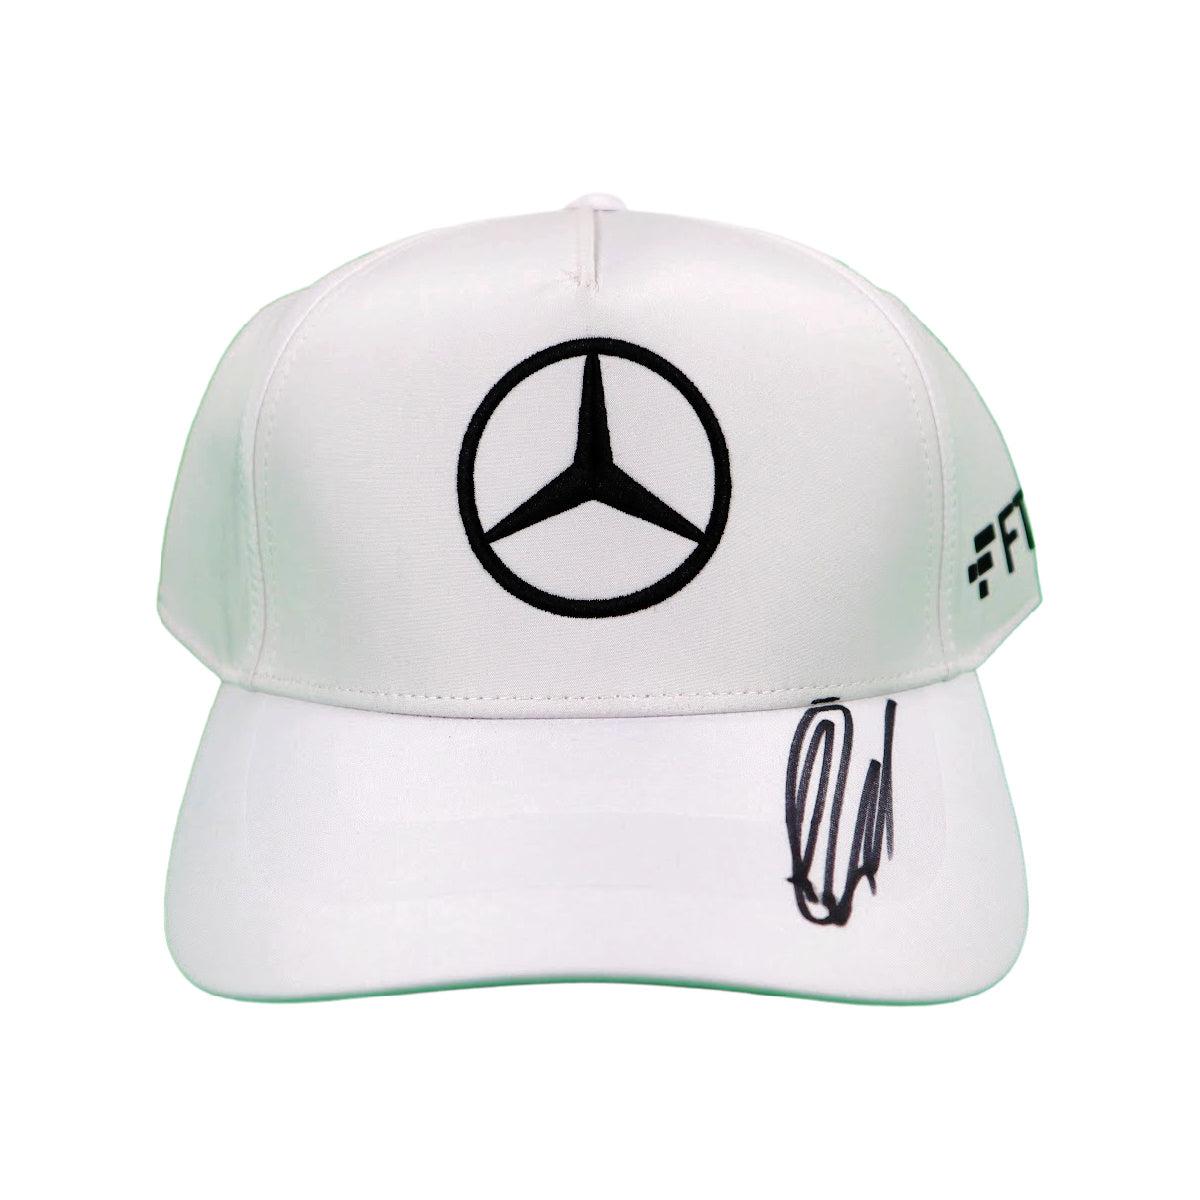 George Russell Signed Mercedes F1 Hat Autographed JSA COA 2